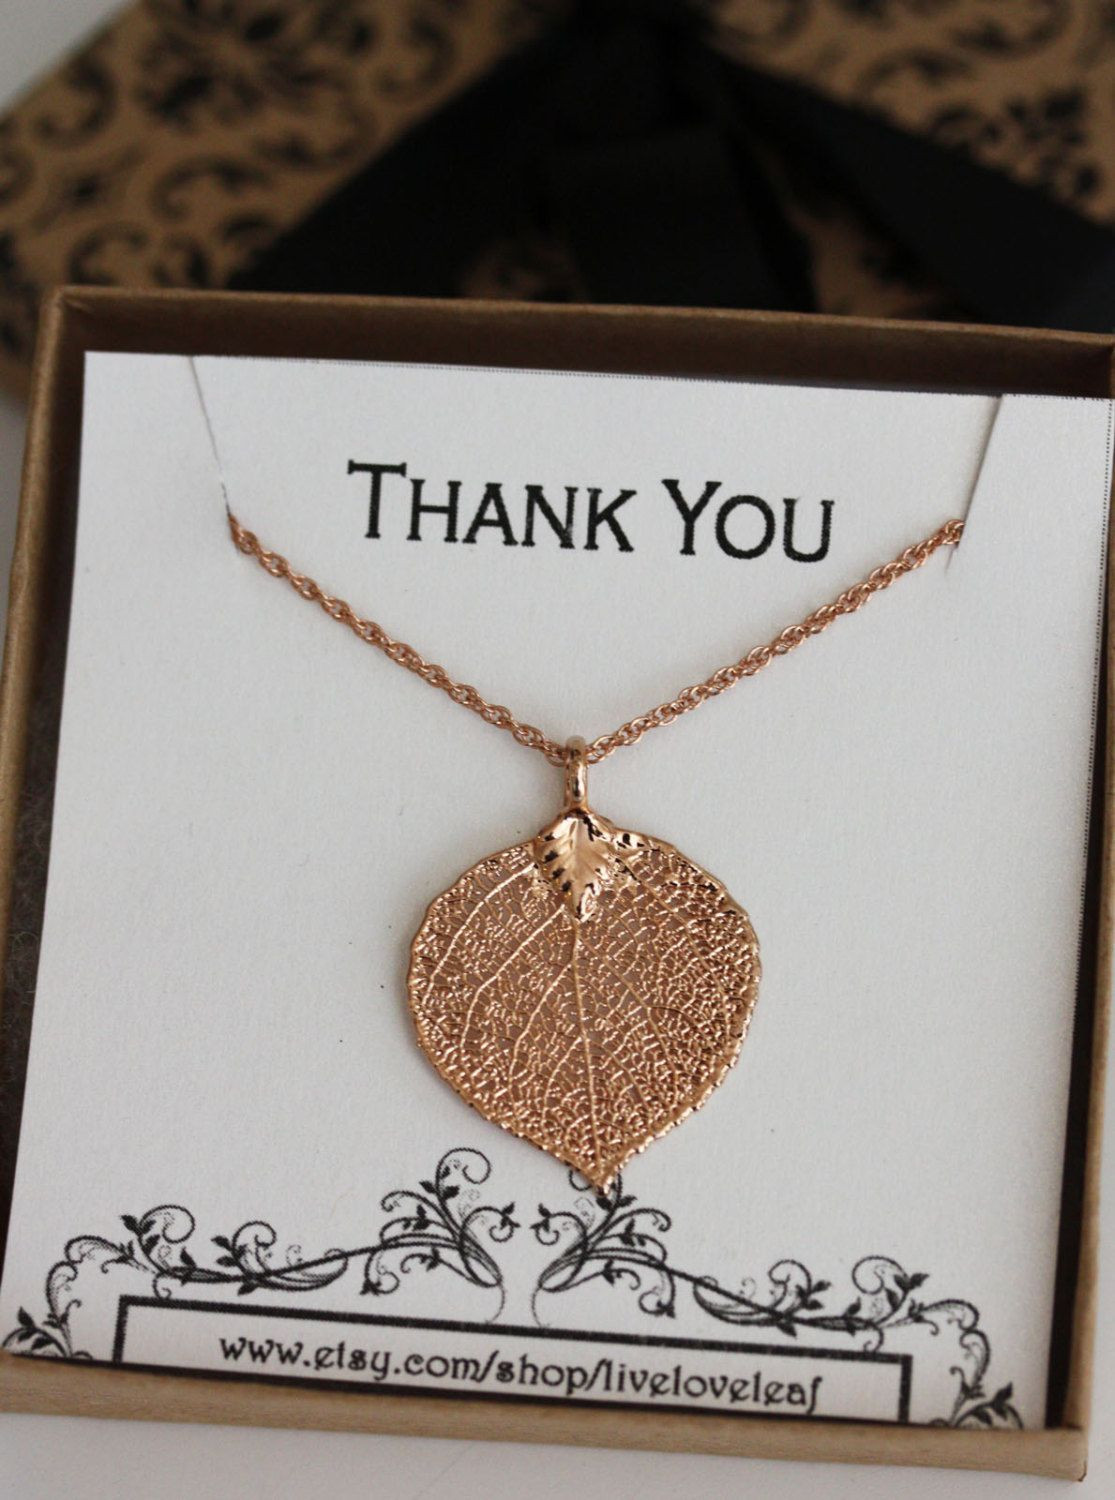 Thank You Gift Ideas For Her
 Thank you Gift Rose Gold Aspen Leaf Pendant by